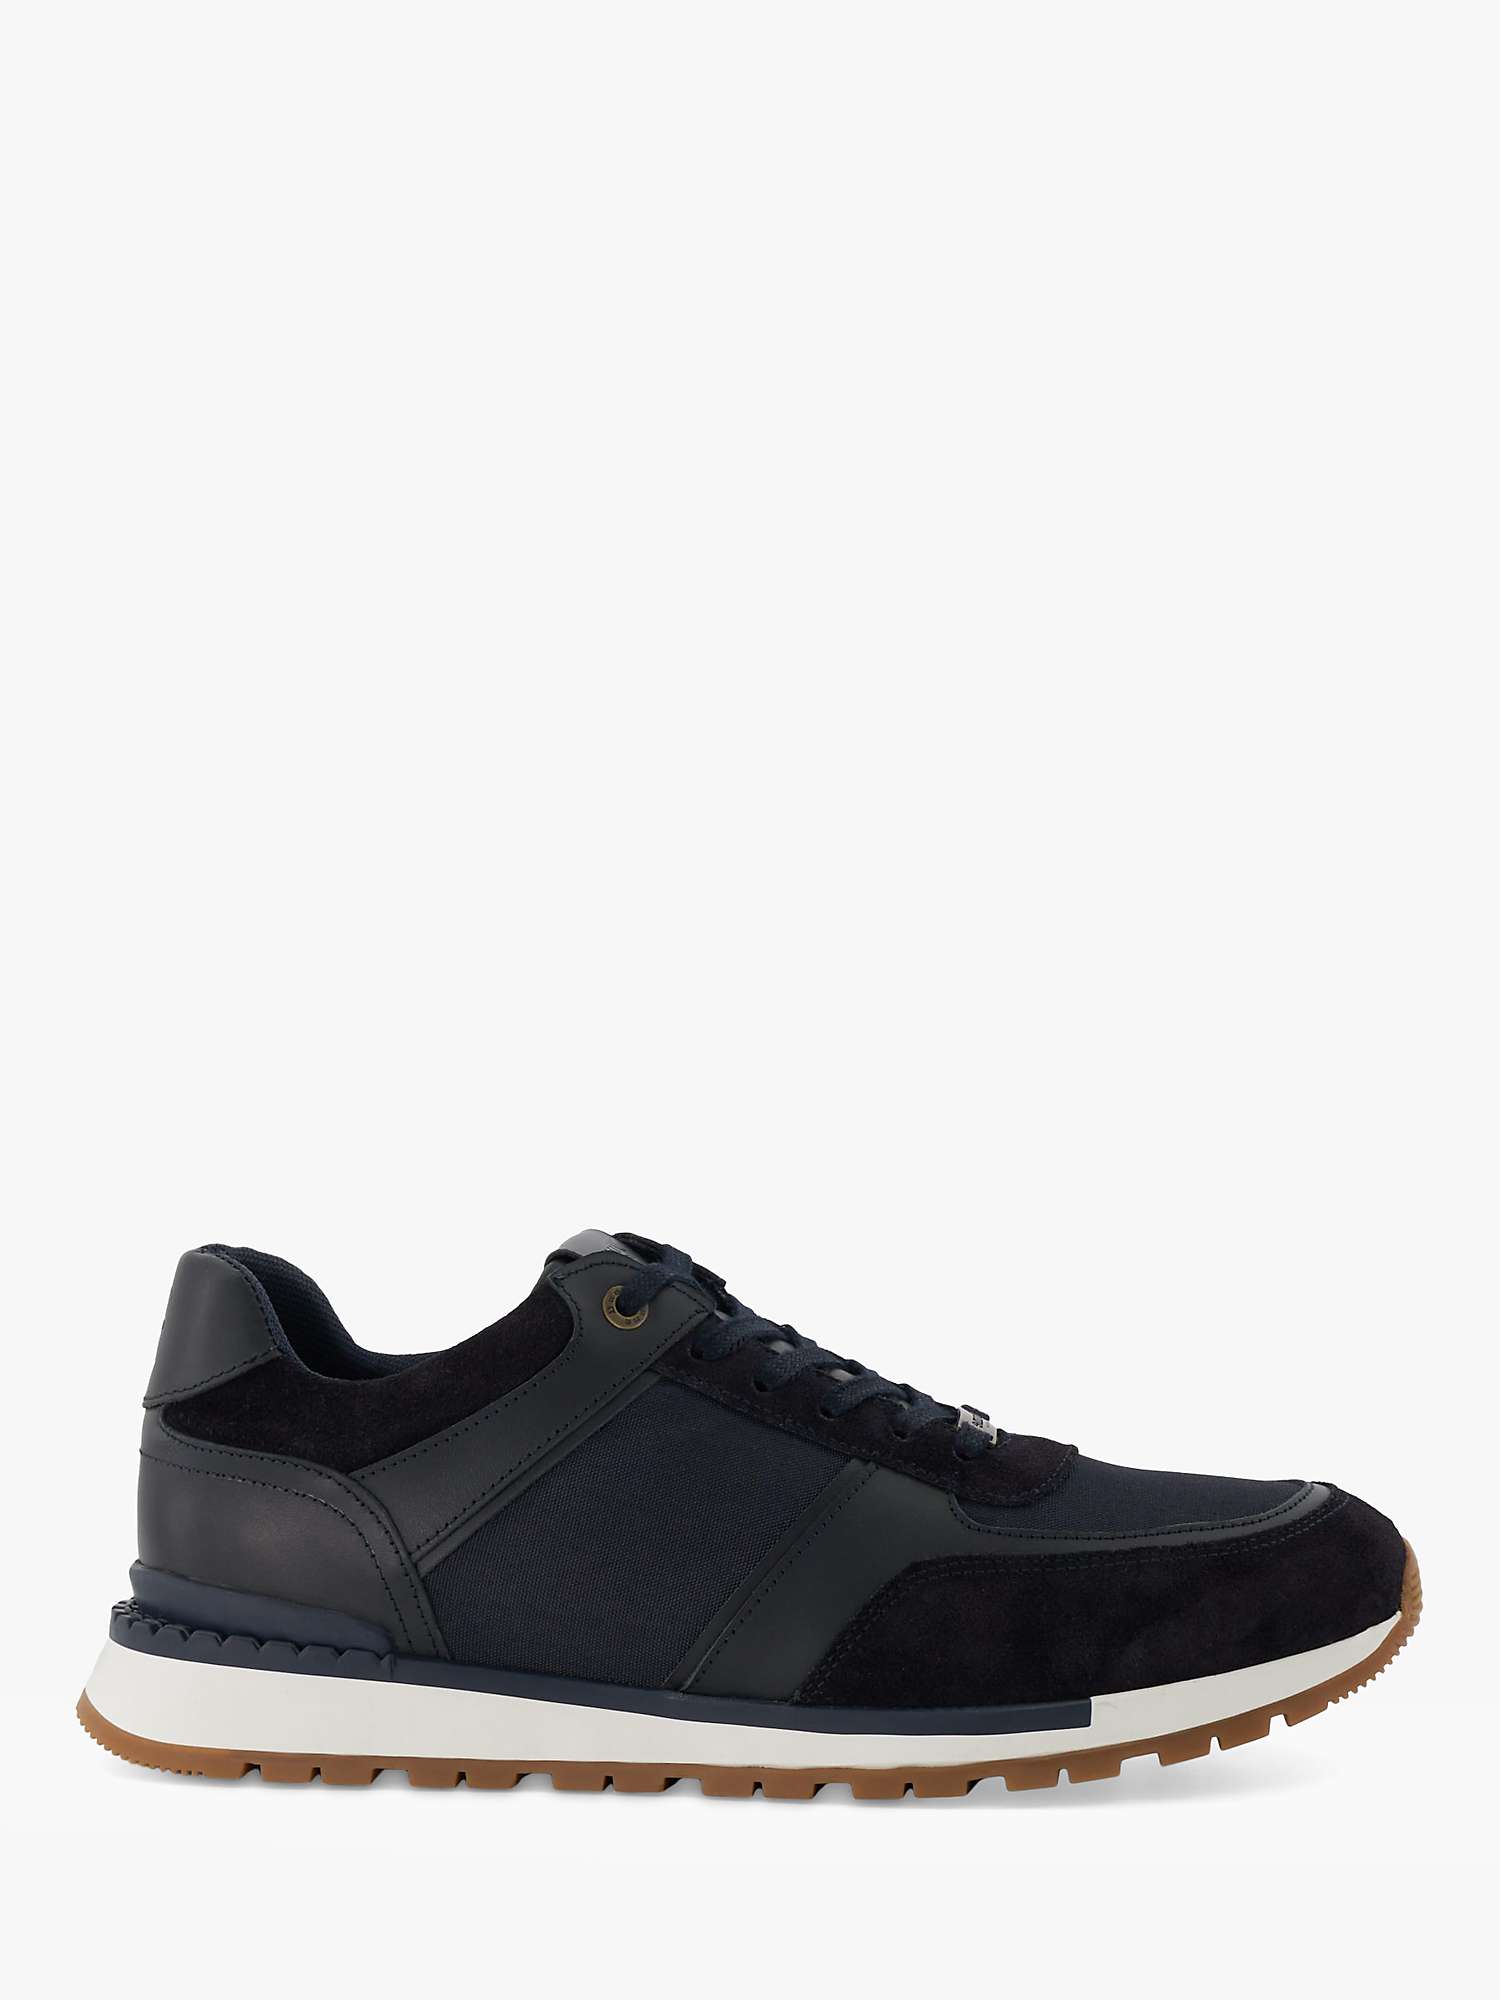 Buy Dune Titles Suede and Leather Trainers Online at johnlewis.com